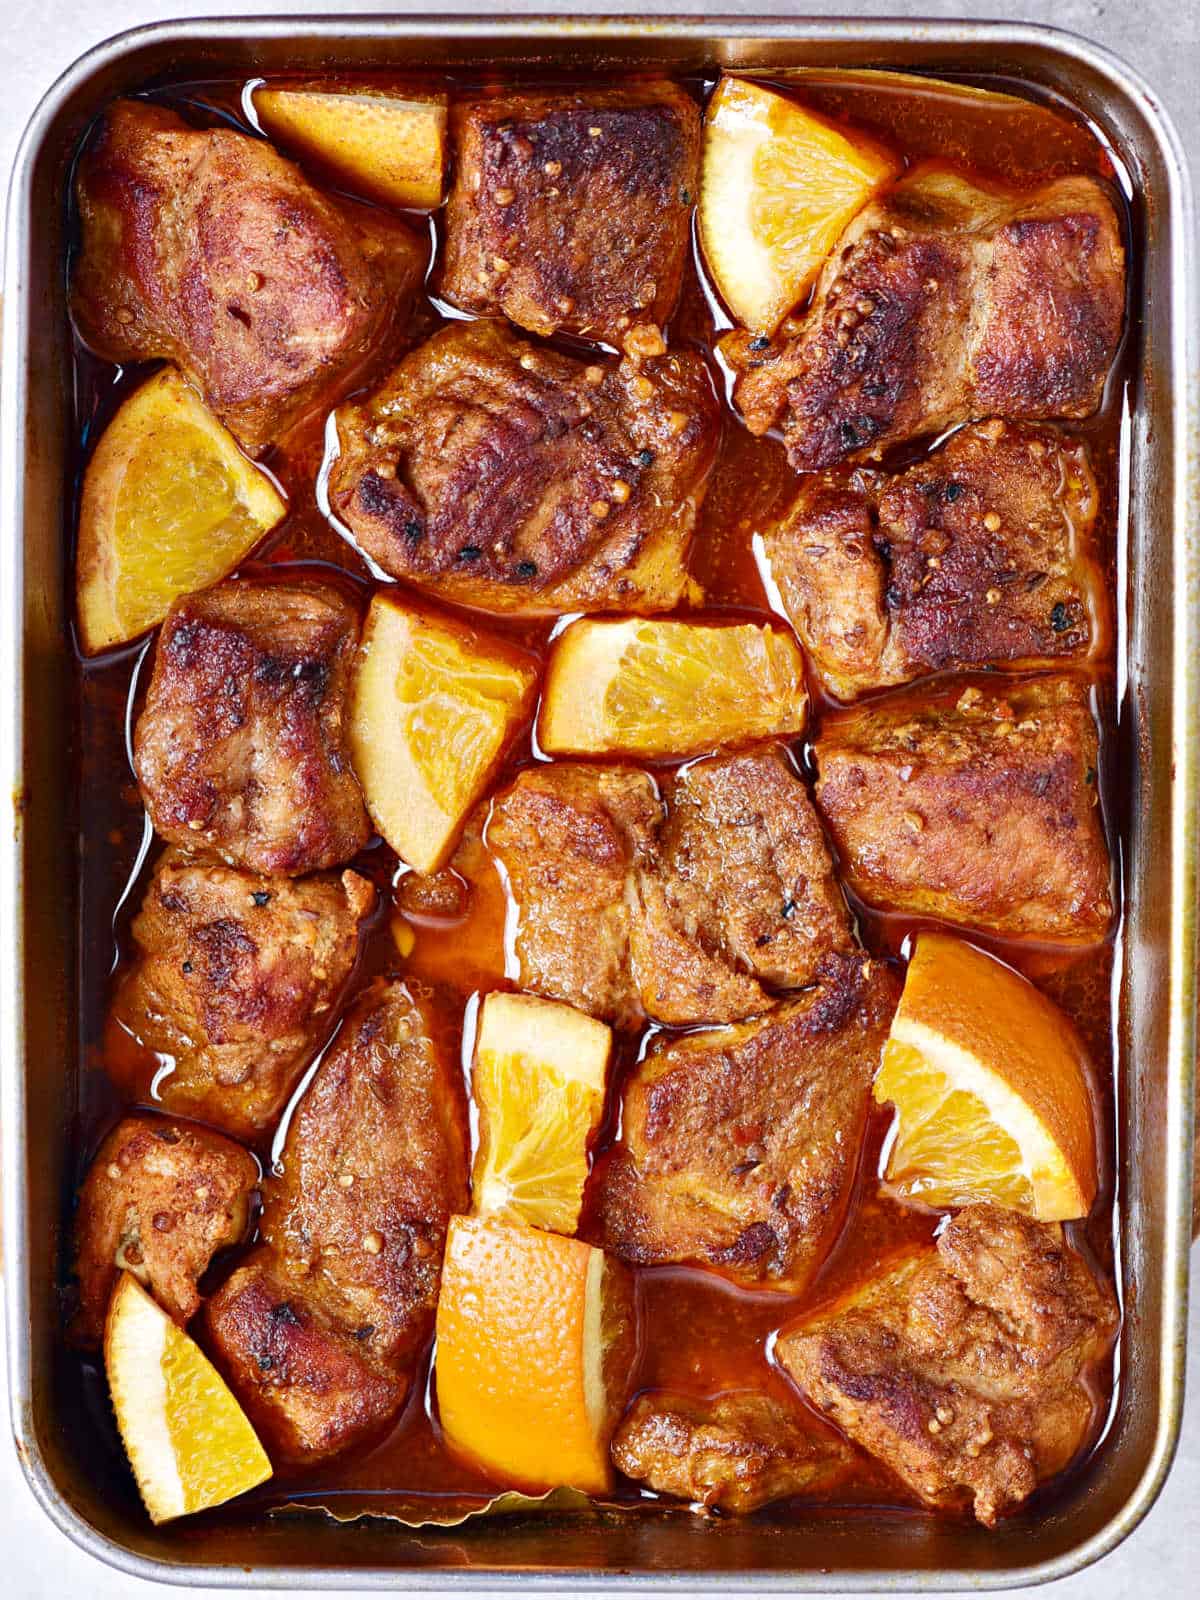 Pork shoulder pieces cooked in a baking tray with orange pieces.